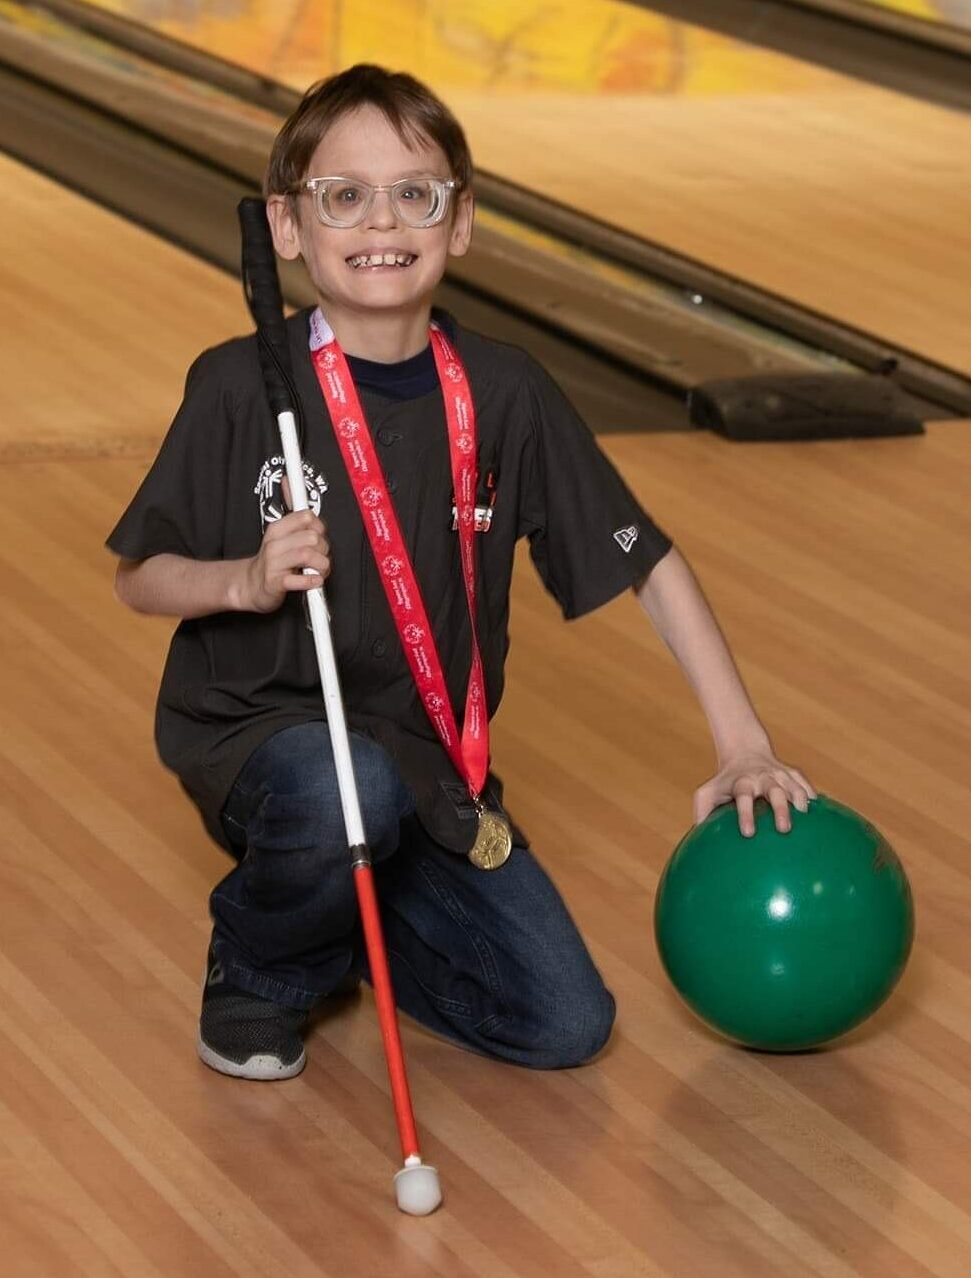 Luke holding his cane and a bowling ball, posing for the camera at the bowling alley